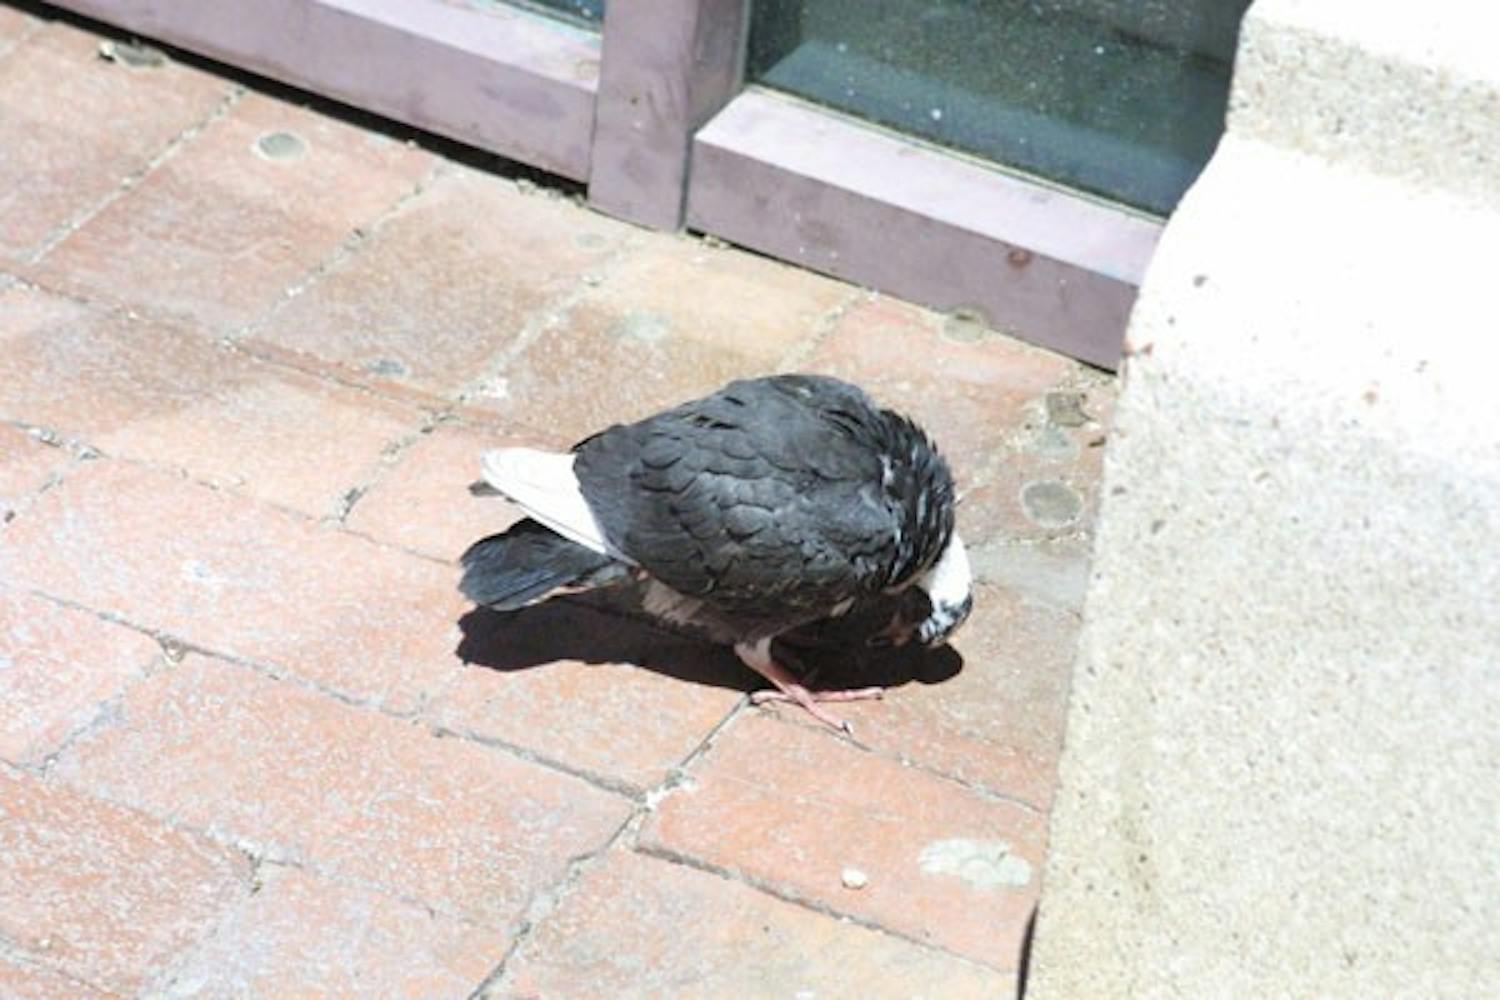 SEEKING SHELTER: An injured bird rests in a corner of a building on Mill Ave.